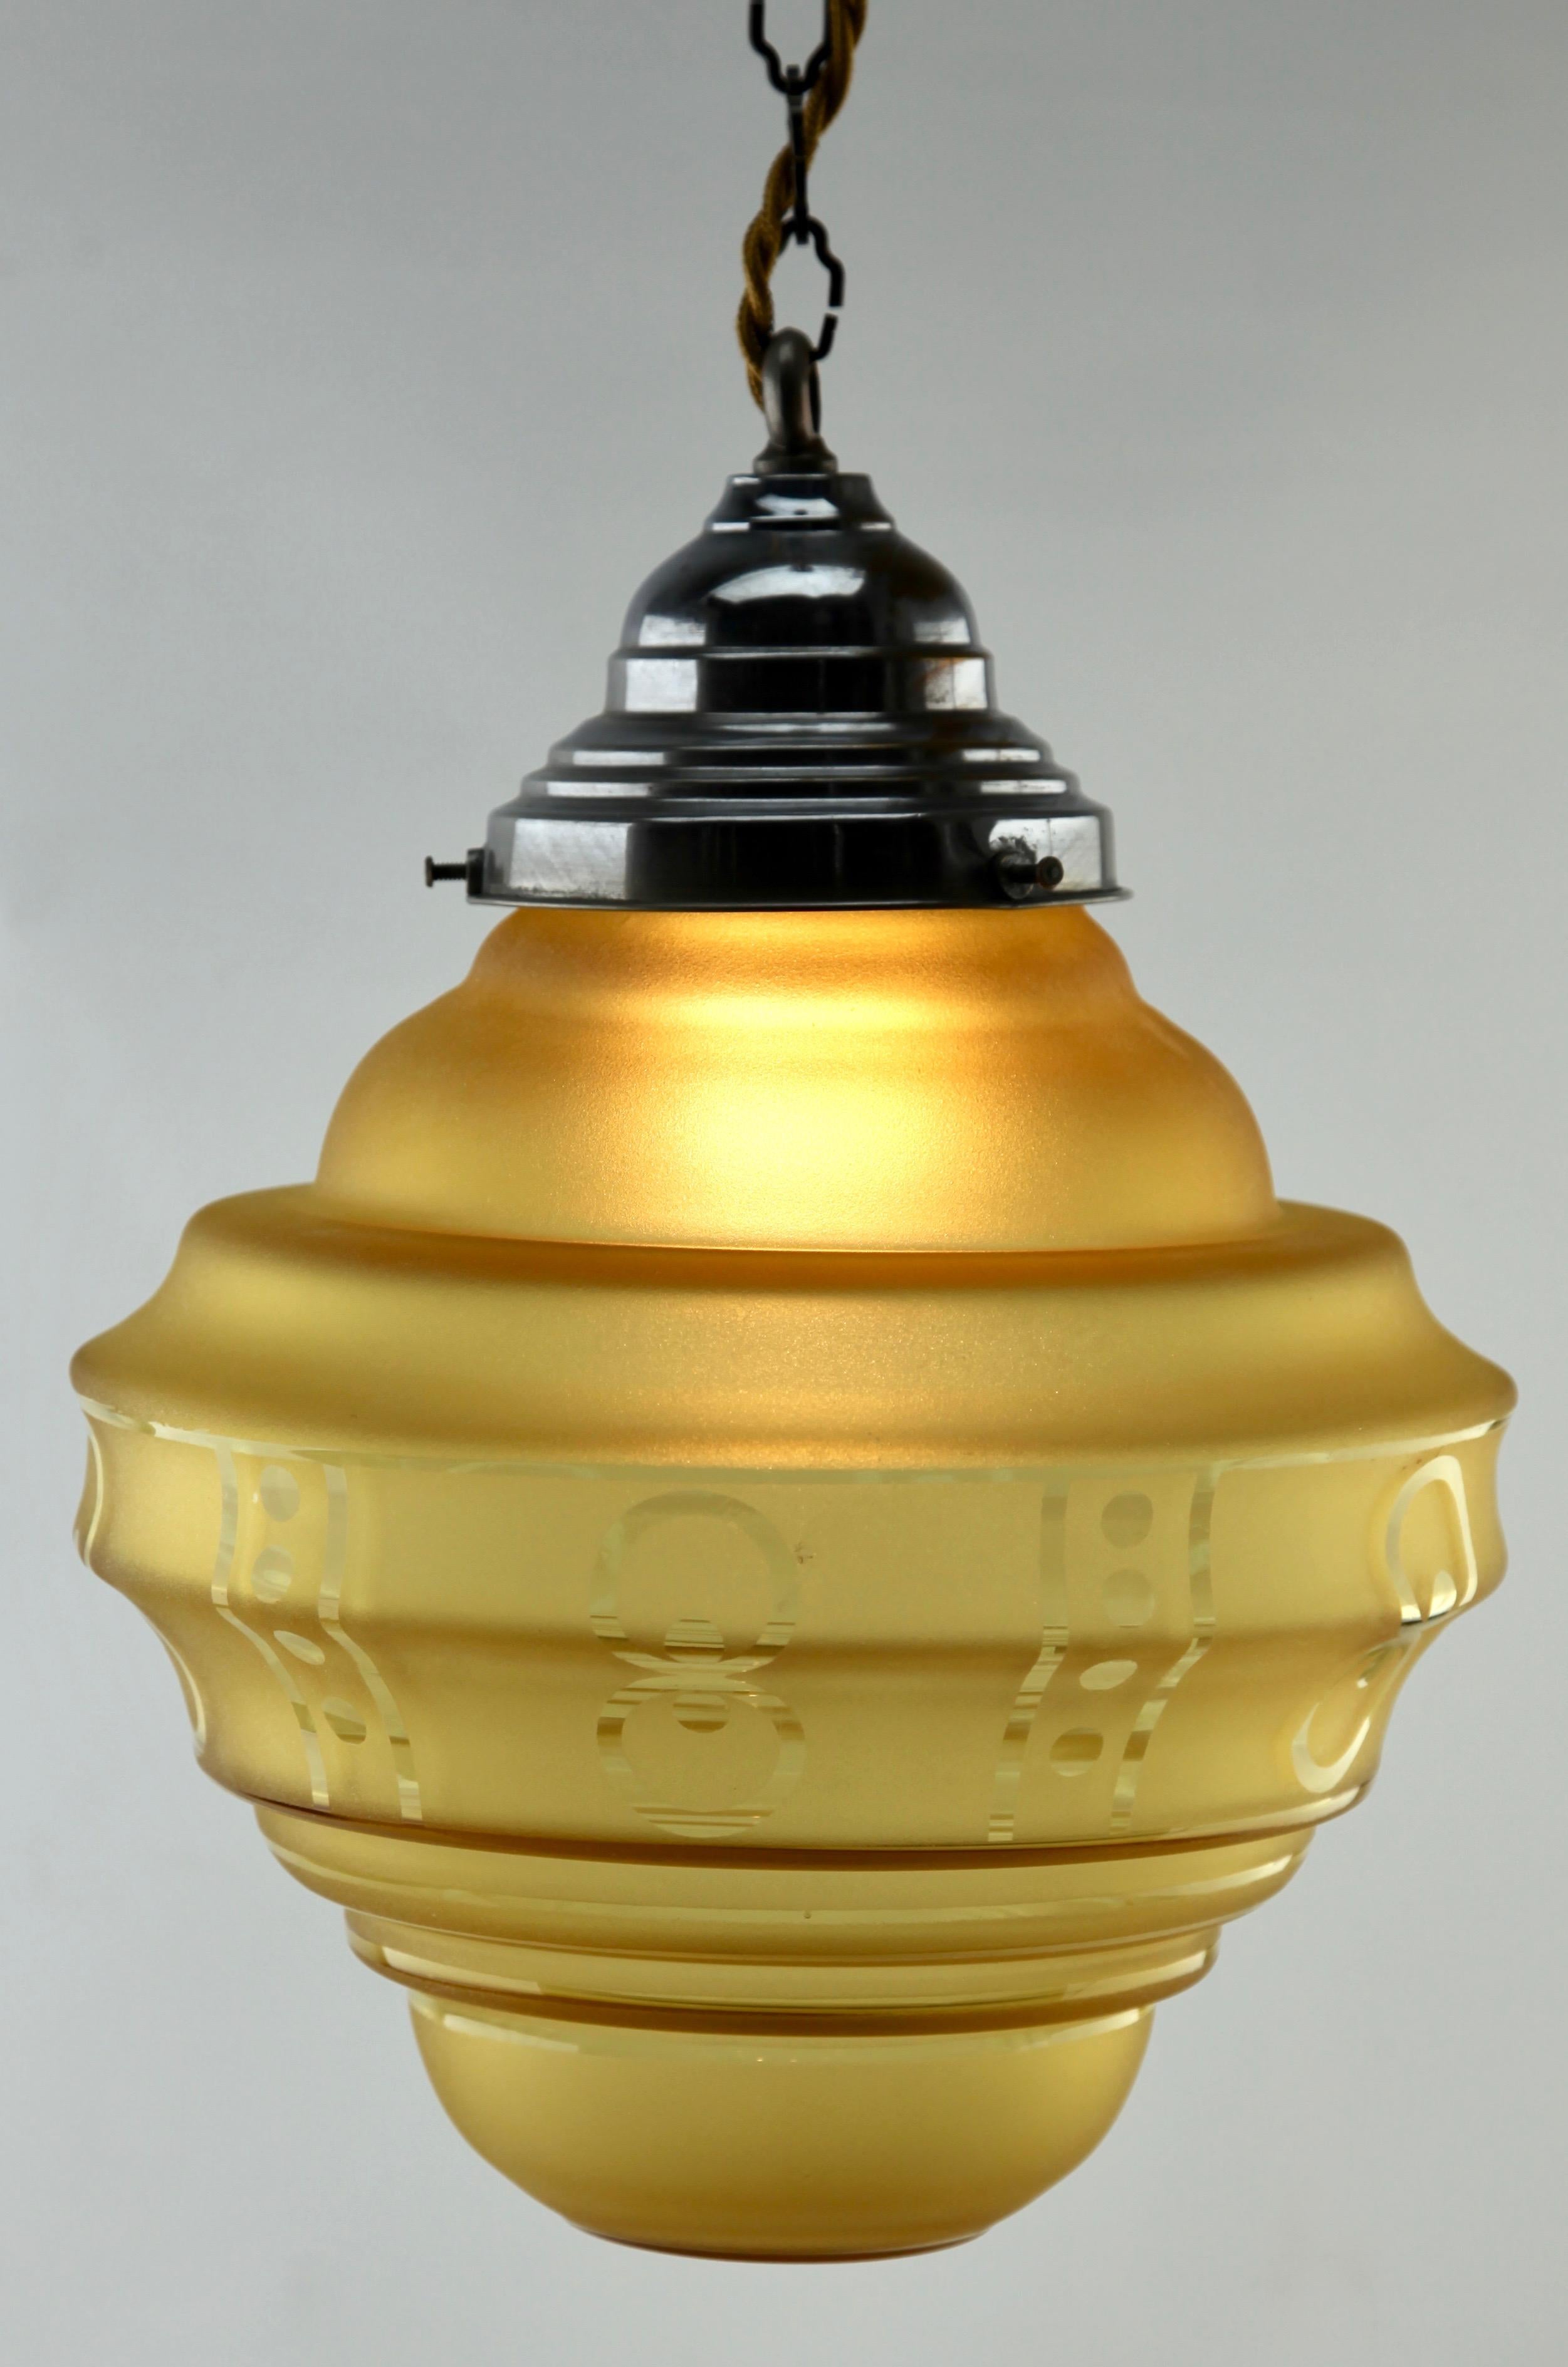 Art Deco ceiling lamp

Photography fails to capture the simple elegant illumination provided by this lamp.

As service: We can adjust the lamp height for you in advance if needed. 

Fitting messing pendant ceiling light with screw fixing to